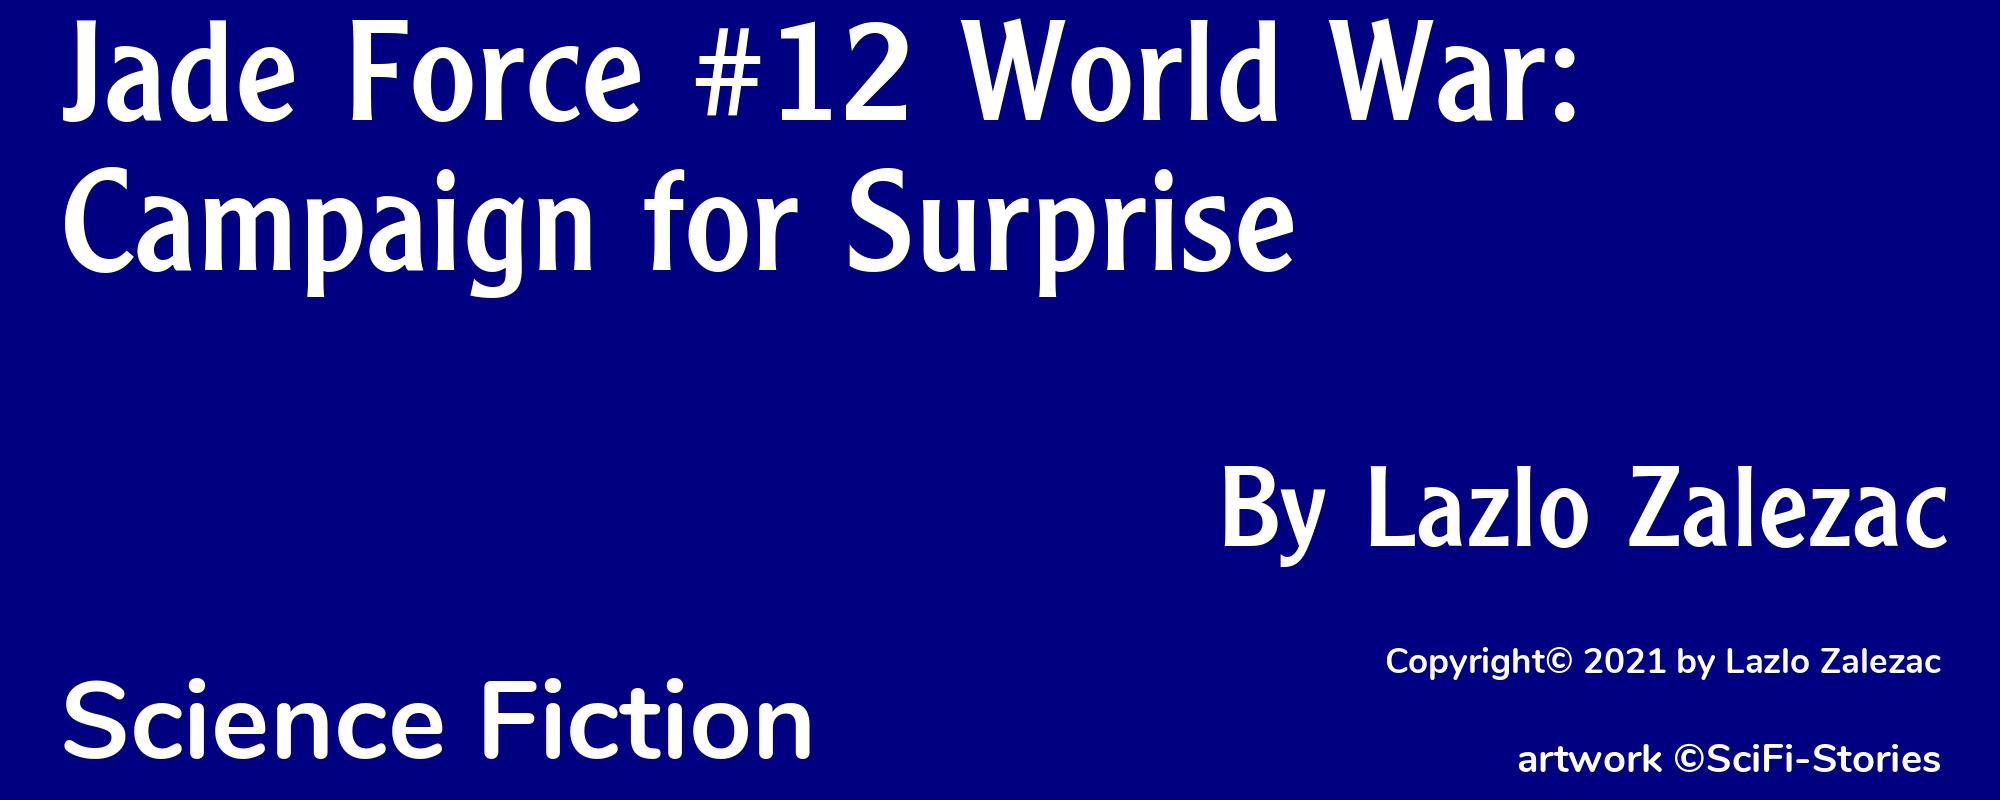 Jade Force #12 World War: Campaign for Surprise - Cover